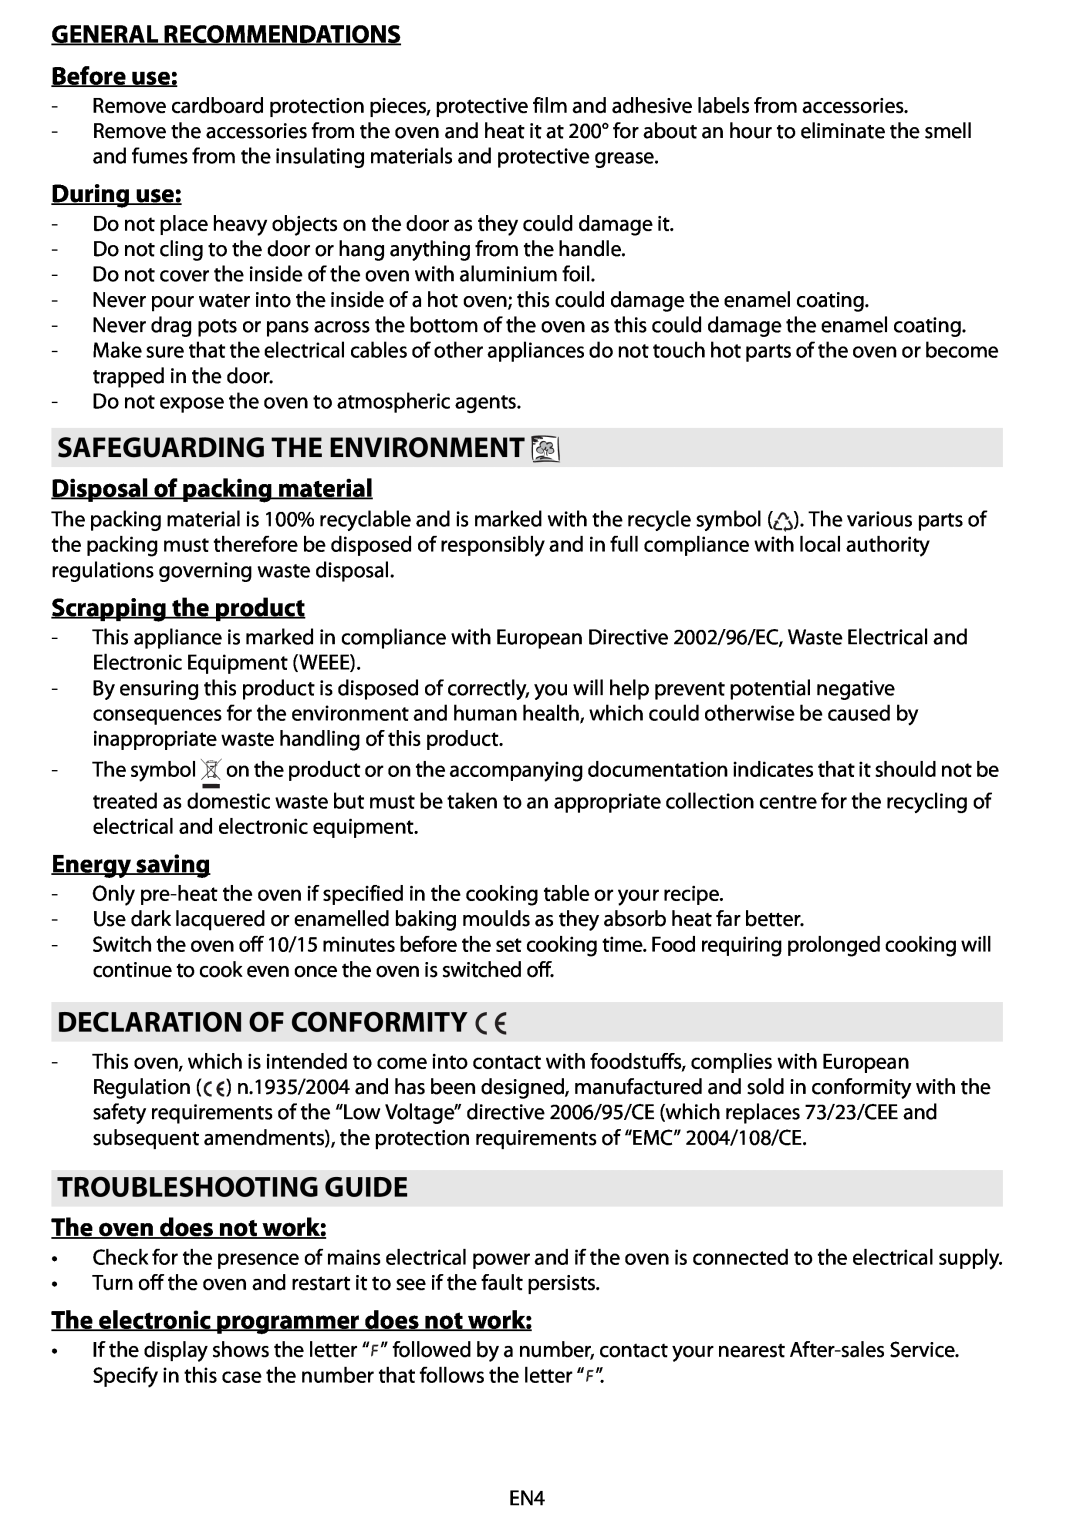 Whirlpool AKZM 775 Safeguarding The Environment, Declaration Of Conformity, Troubleshooting Guide, During use 